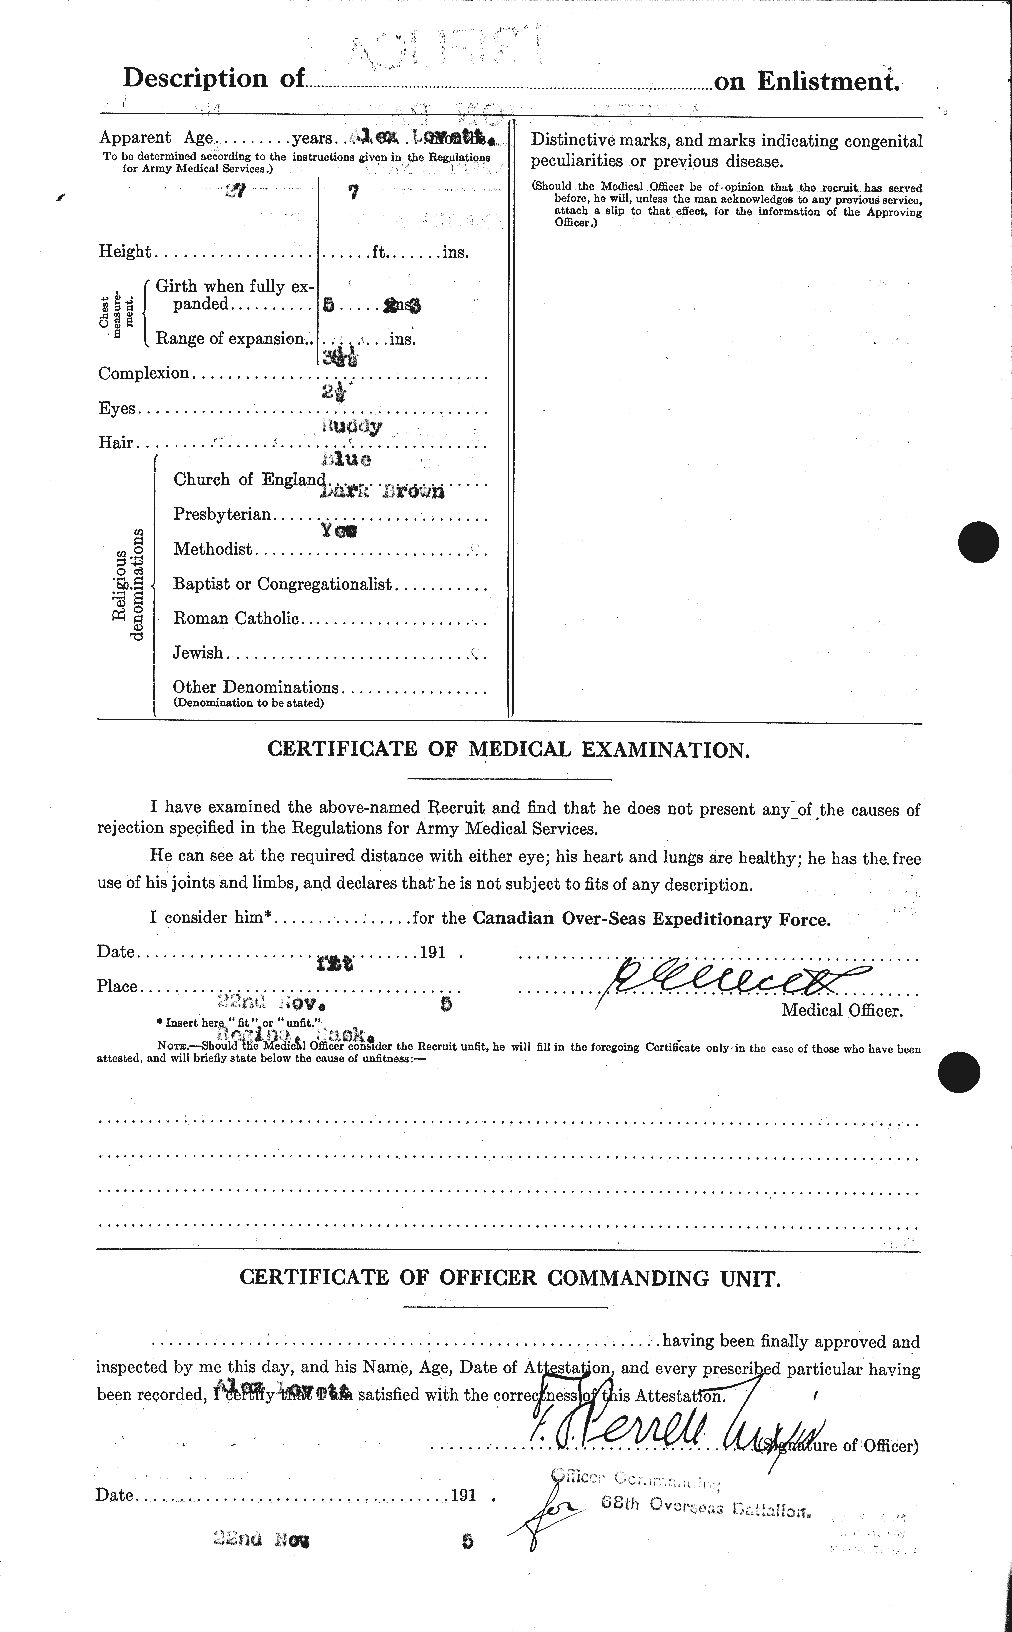 Personnel Records of the First World War - CEF 475471b